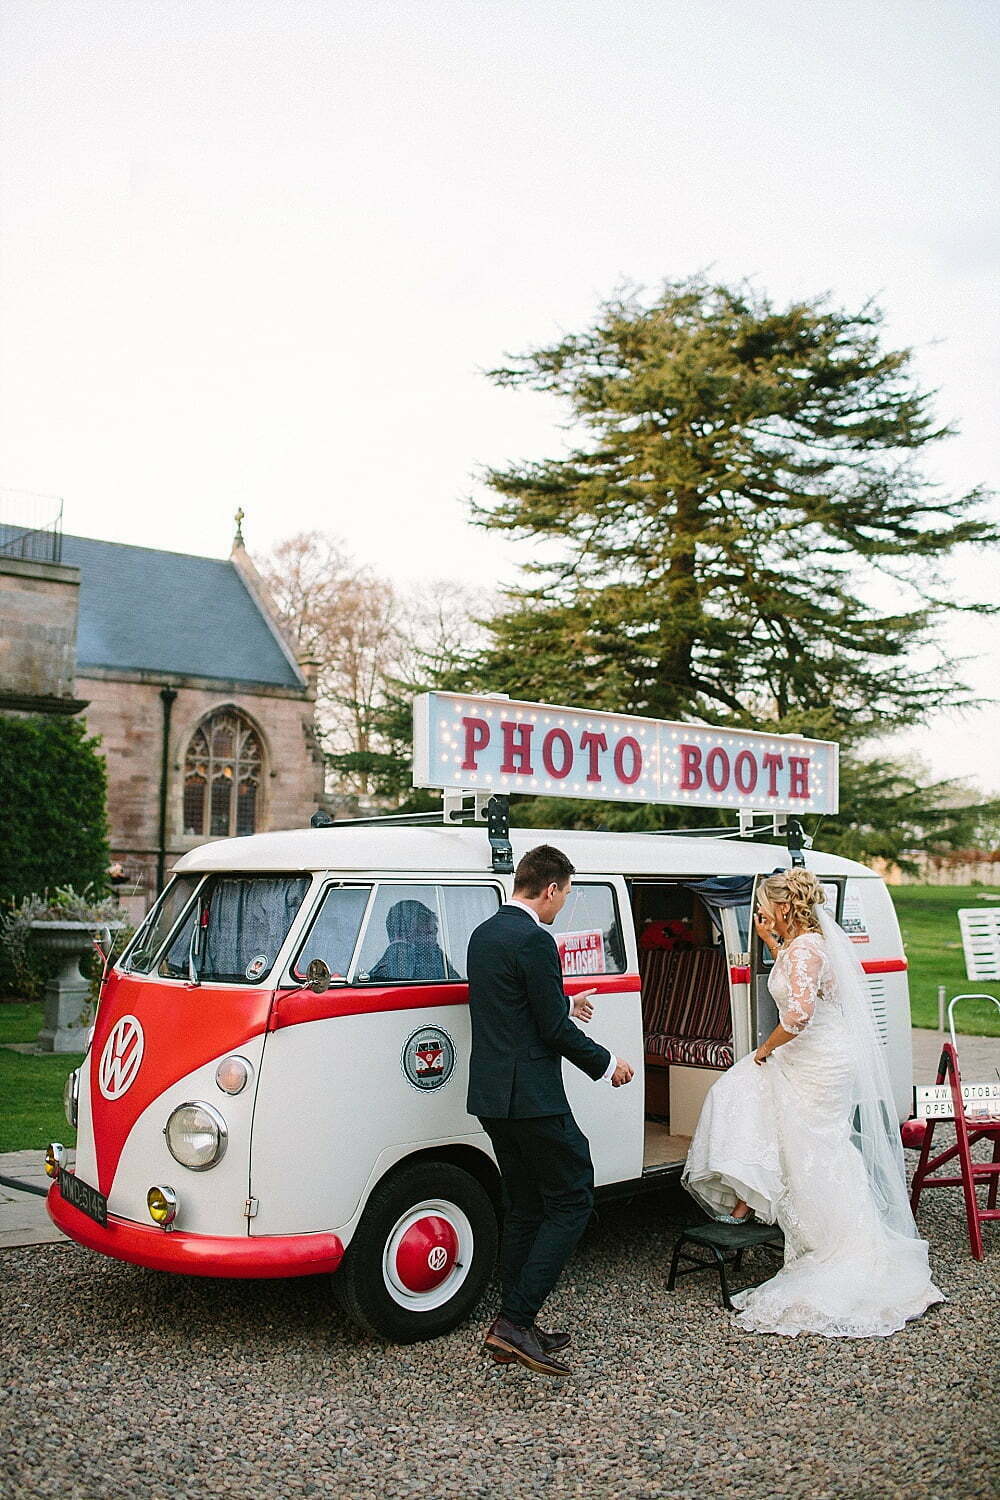 Wedding Party Photo Booth North East In VW Camper Van